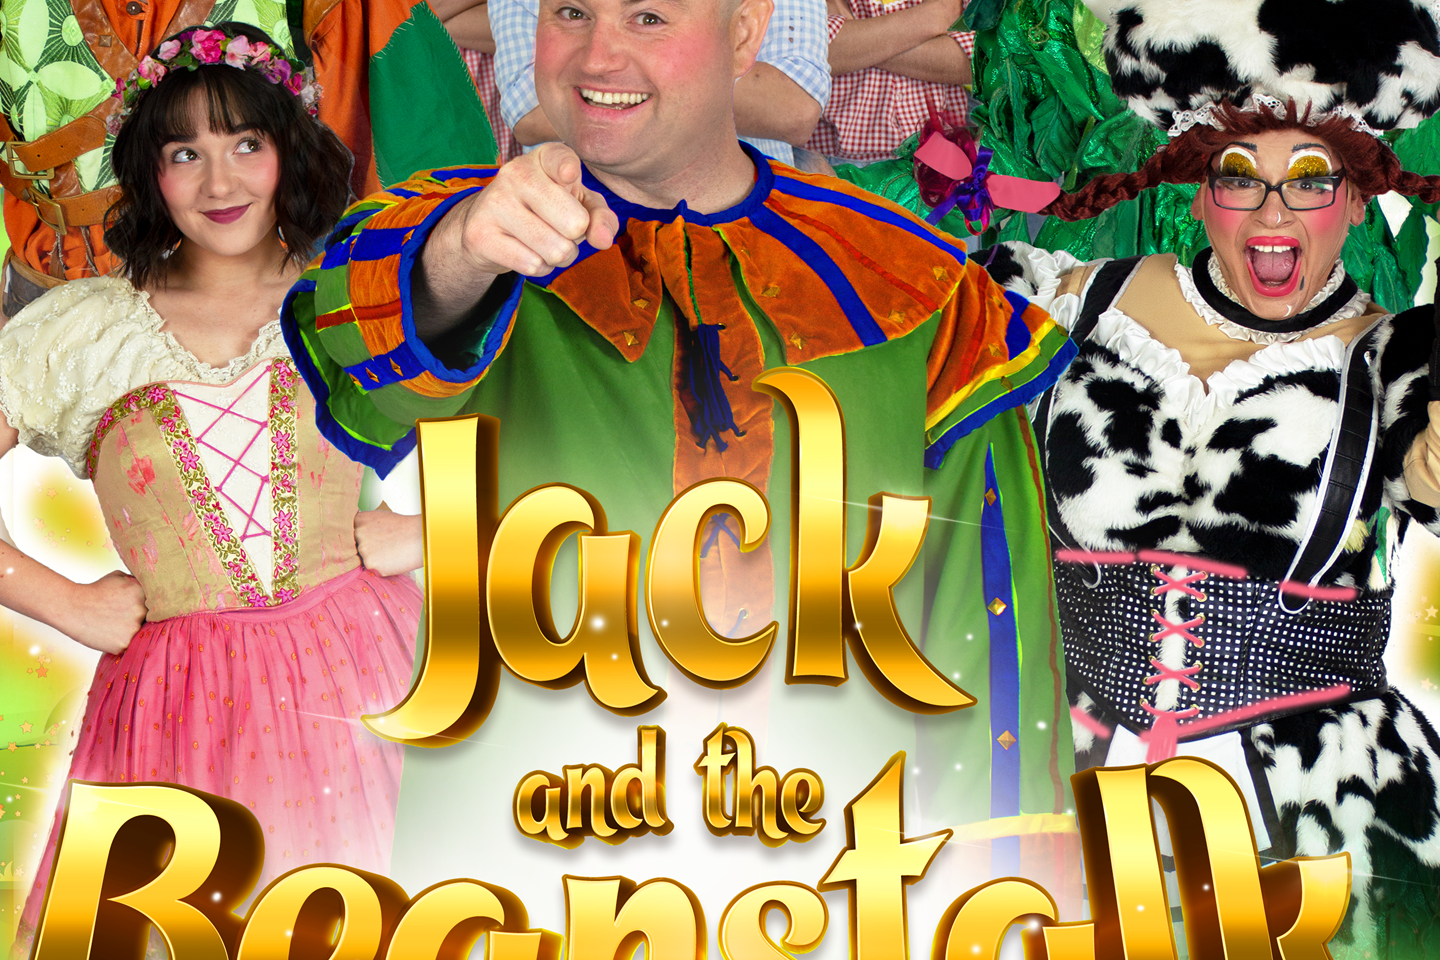 Pantomime characters, to perform Jack and the Beanstalk